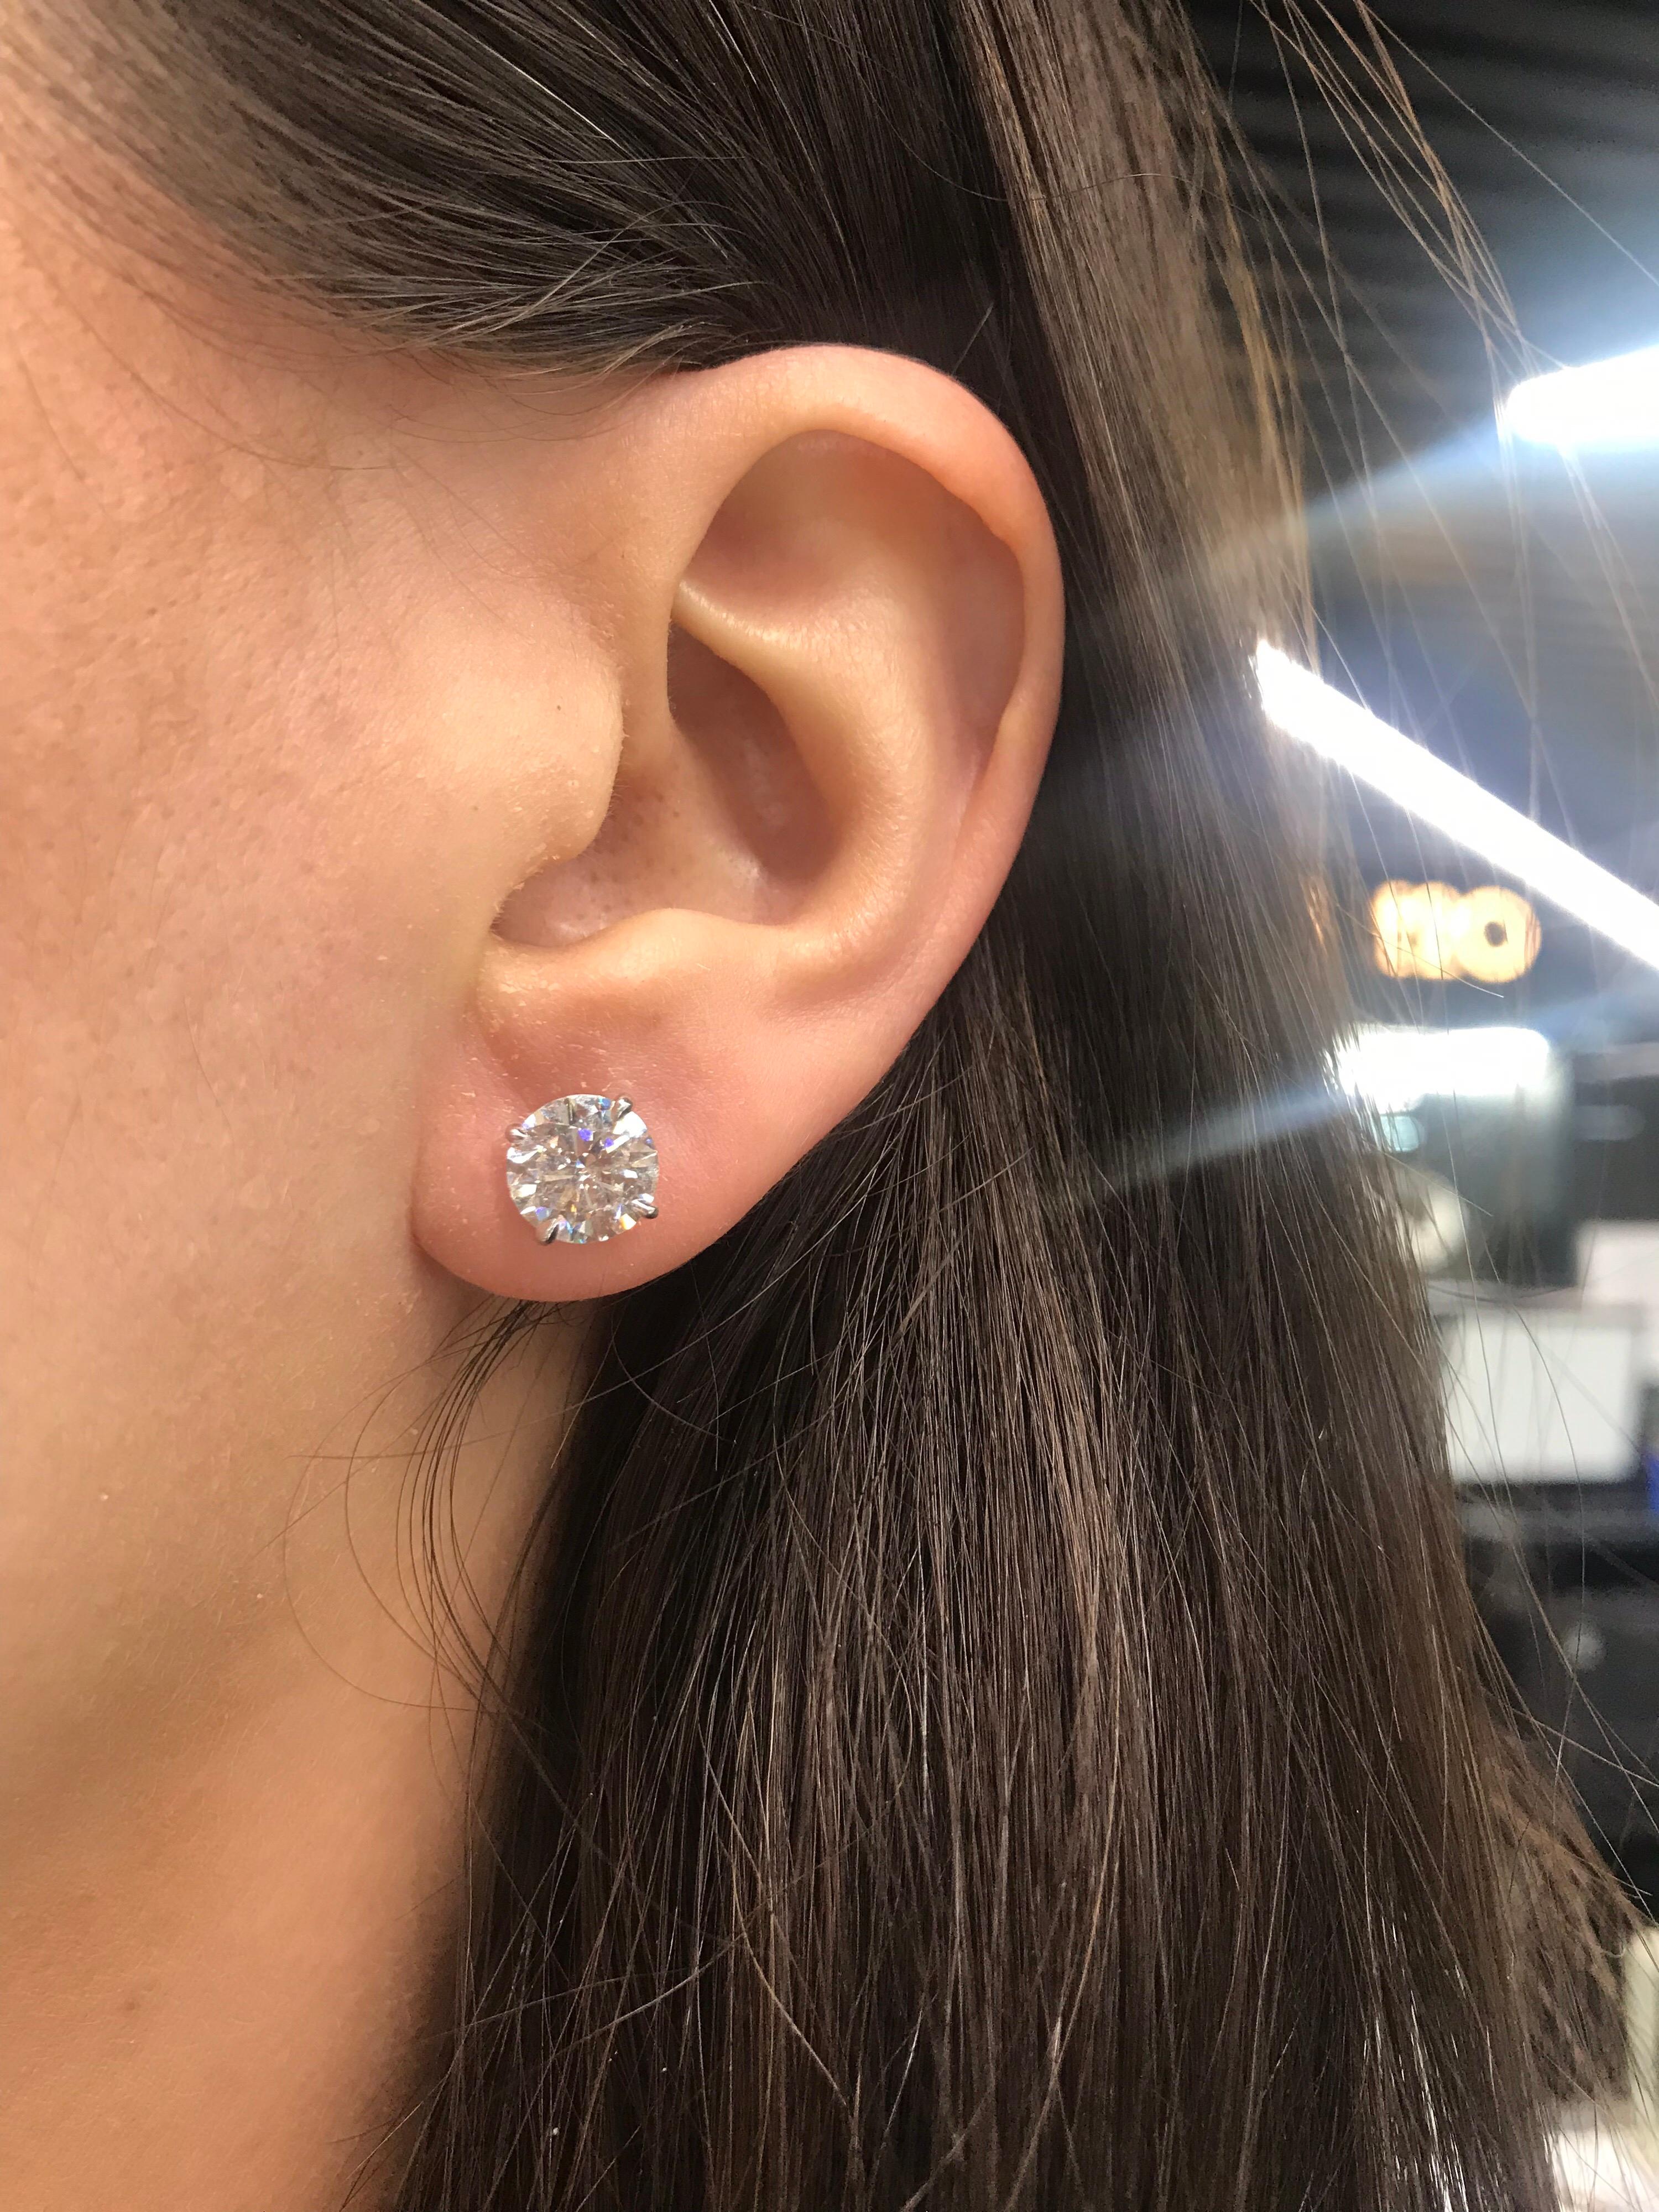 Diamond Stud earrings featuring two round brilliants weighing 4.19 carats in a 4 prong champagne setting, 18k white gold.
Color I-J
Clarity I1-I2